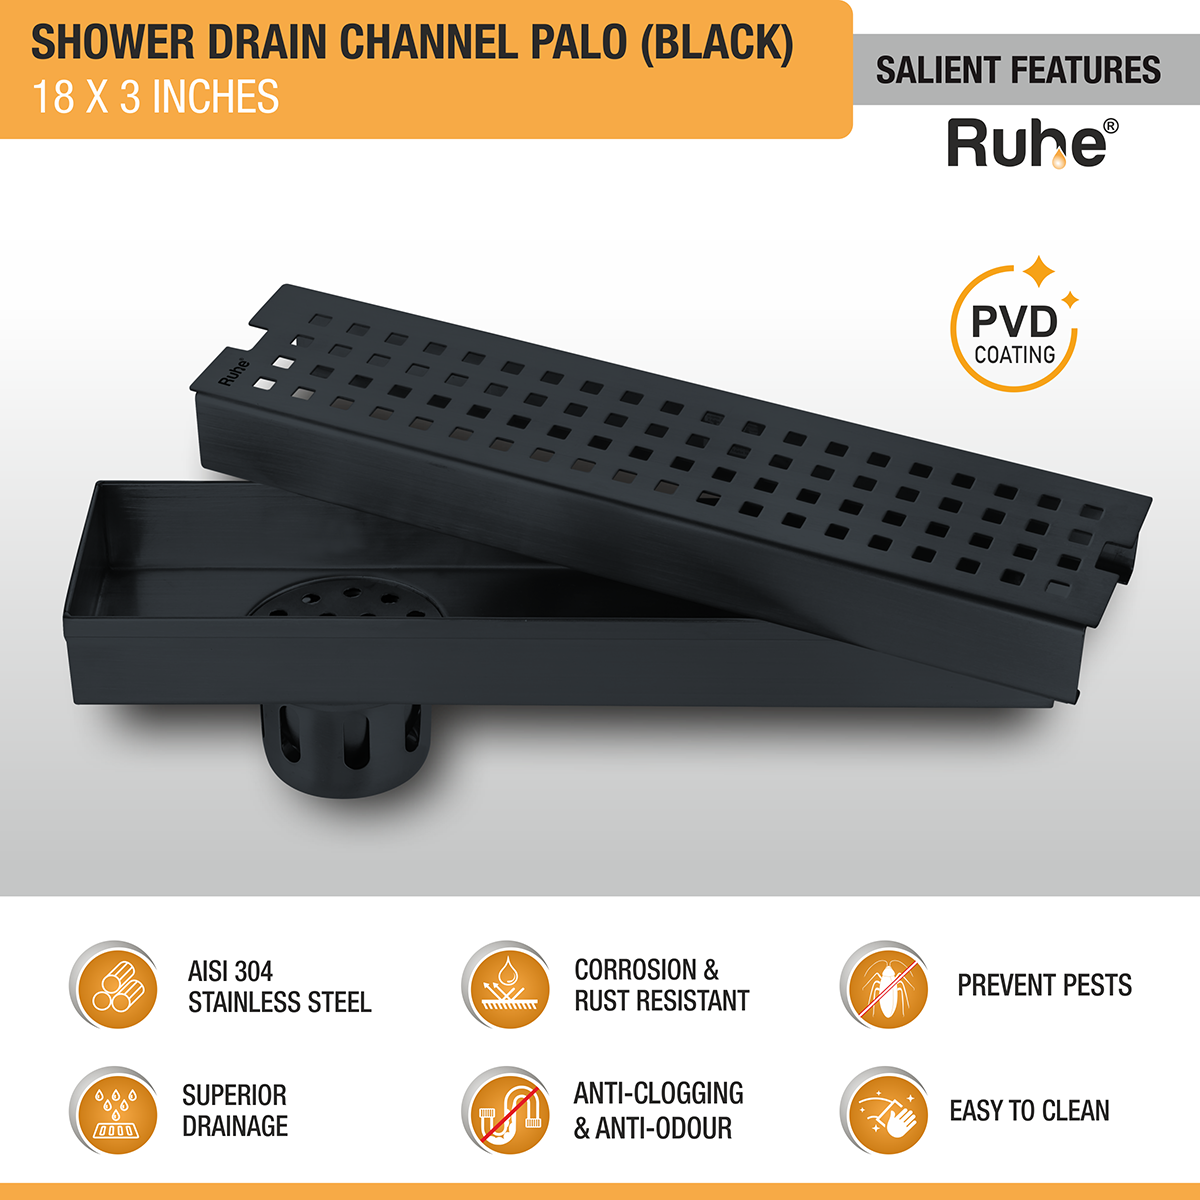 Palo Shower Drain Channel (18 x 3 Inches) Black PVD Coated features and benefits